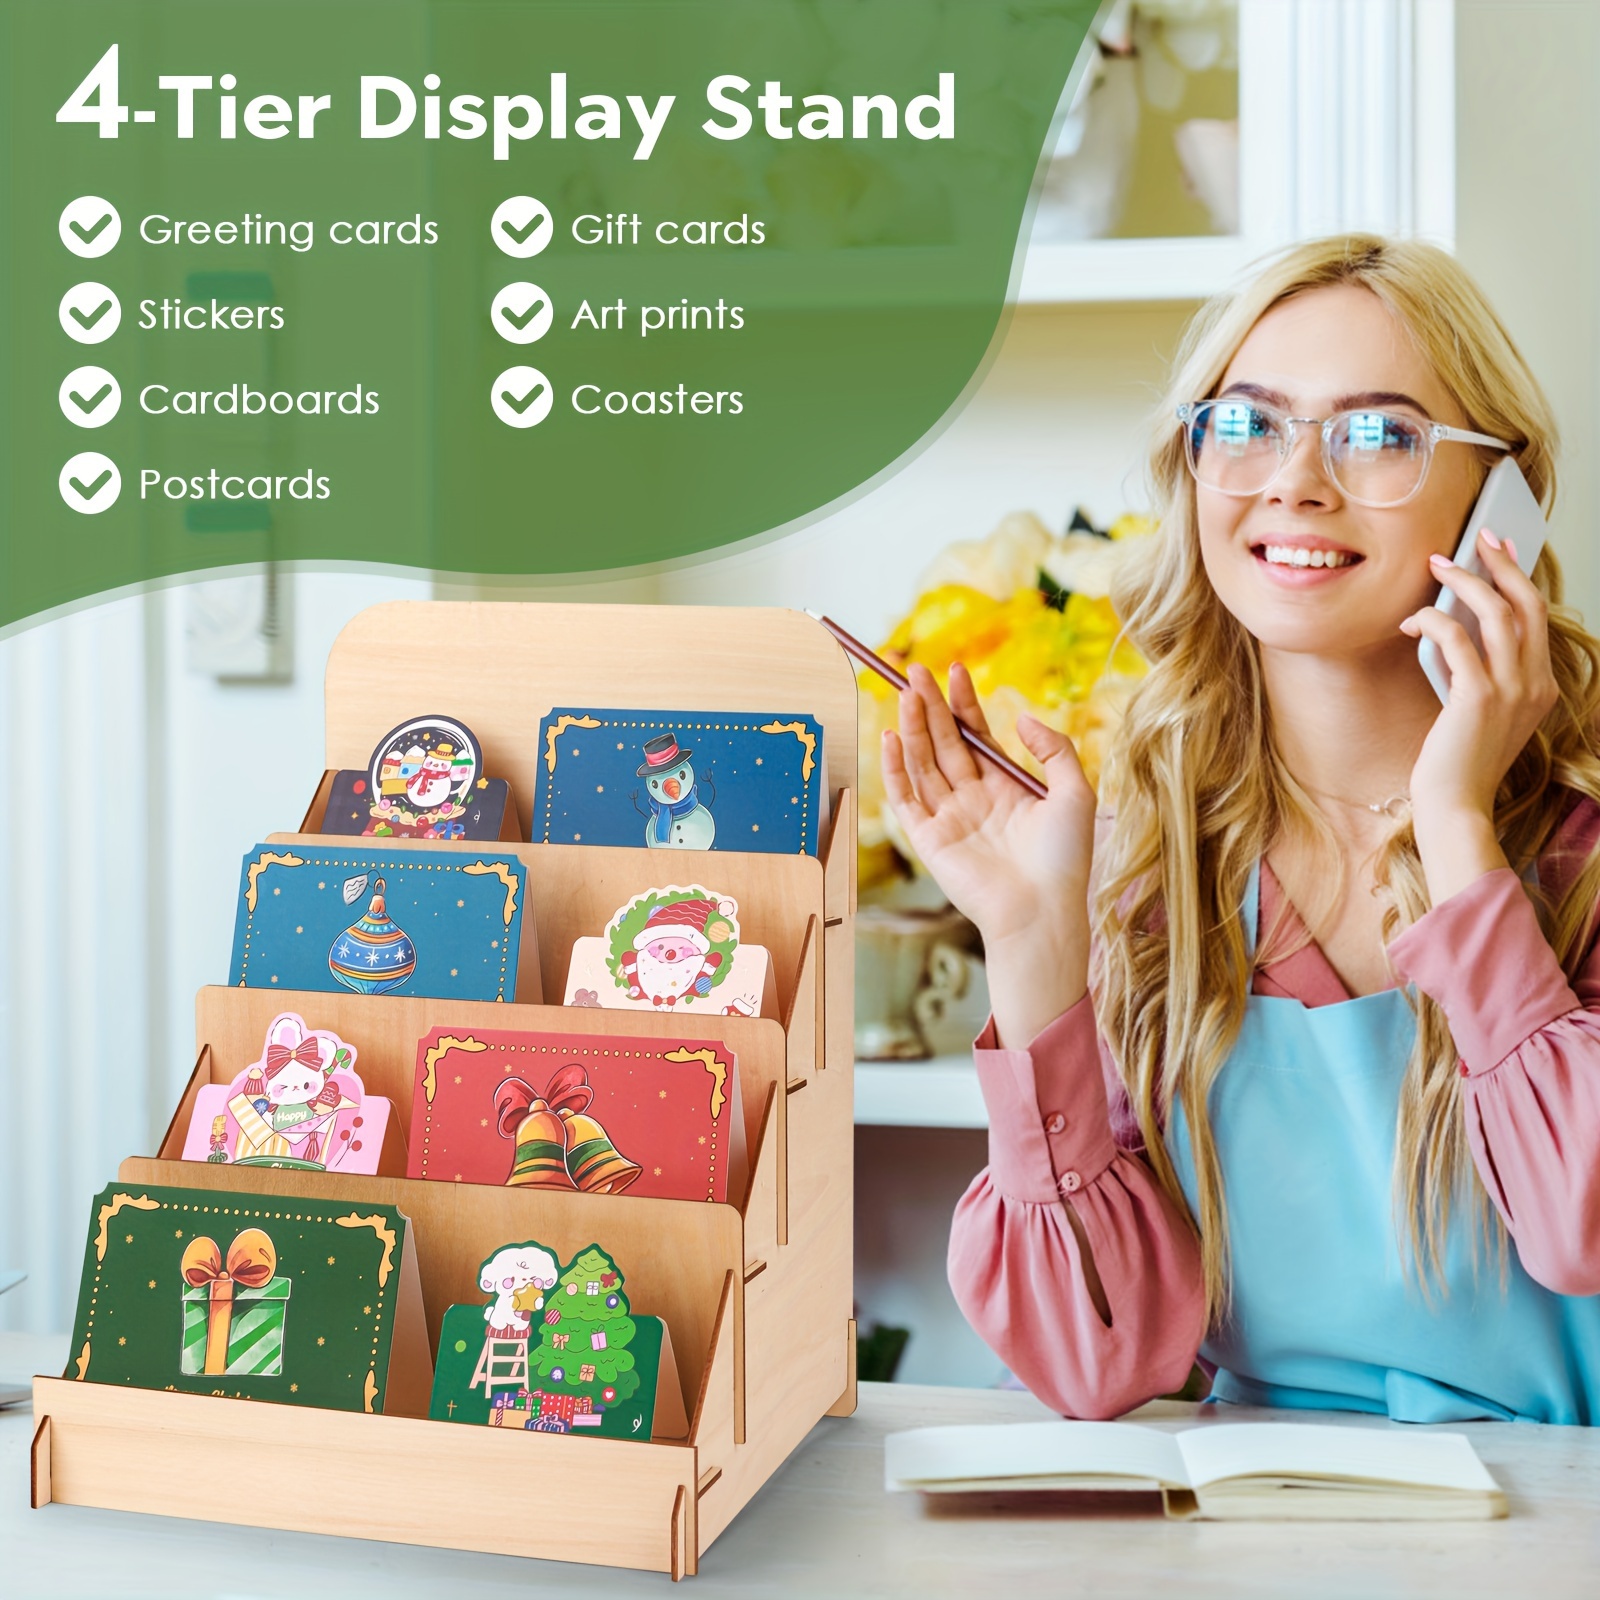 Retyion Greeting Card Display Stand Sticker Display Wooden Display Stand 4 Tier Portable Card Display Rack Retail Display Stand for Greeting Cards